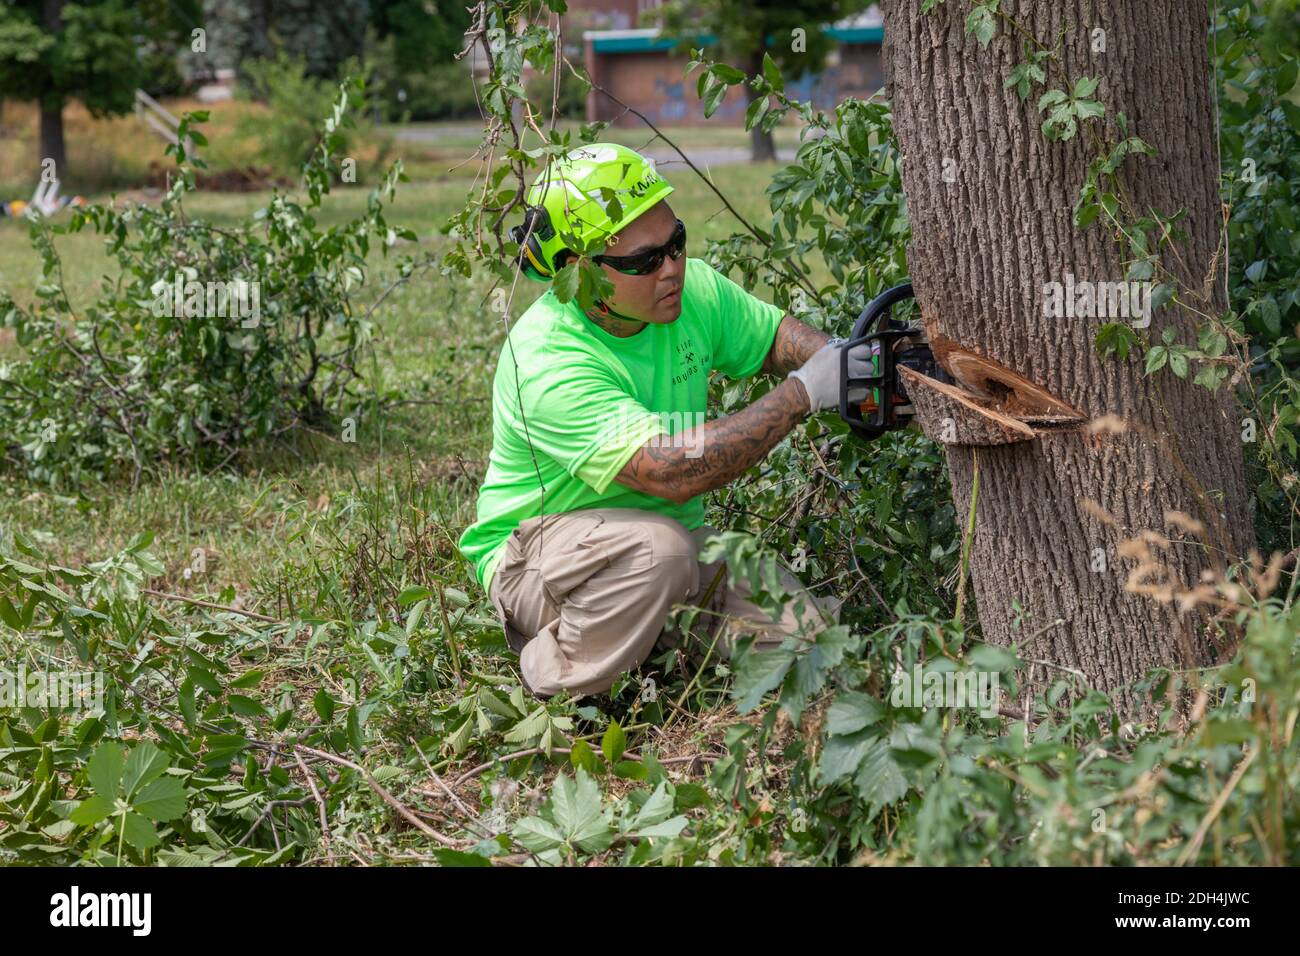 Flint, Michigan - Workers from the Michigan Grounds Crew participate in a community cleanup of vacant lots. Stock Photo